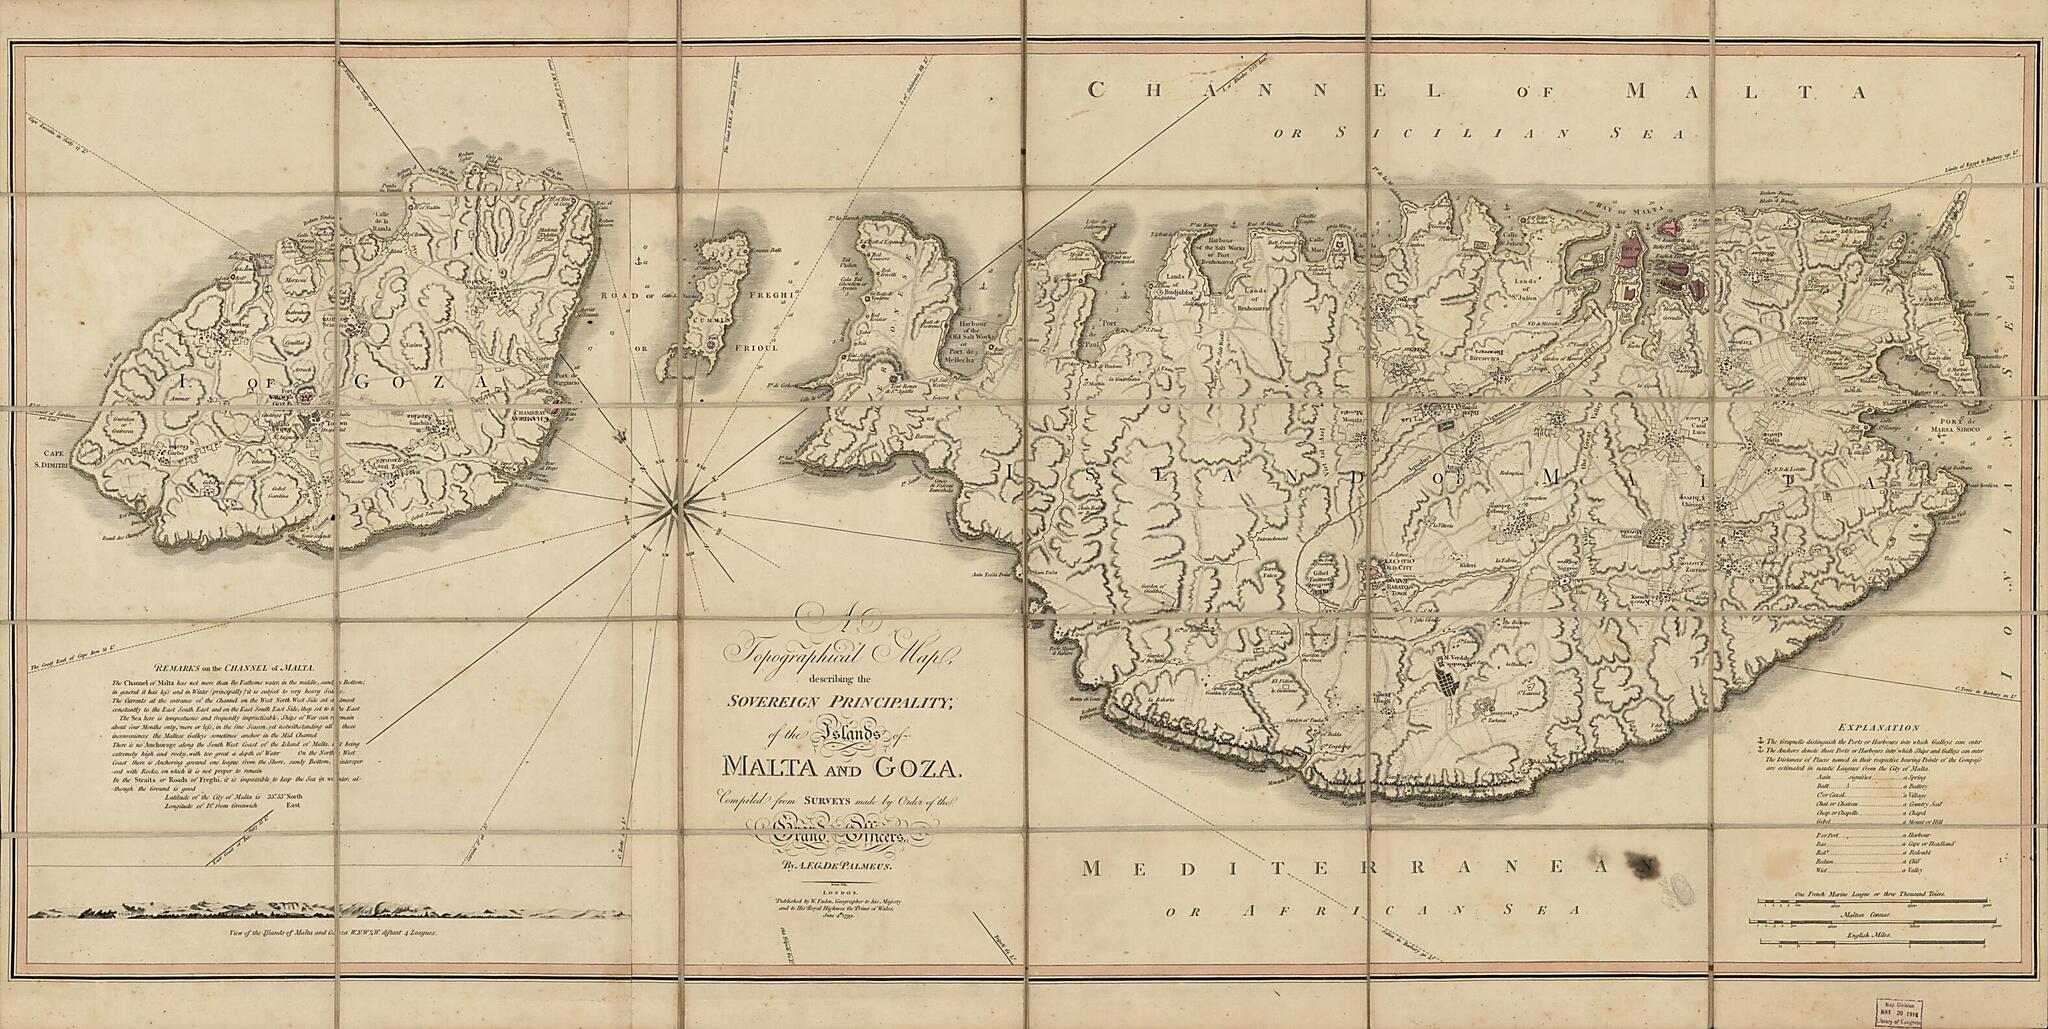 This old map of A Topographical Map Describing the Principality of the Islands of Malta and Goza from 1799 was created by William Faden, A. F. Gervais De Palmeus in 1799